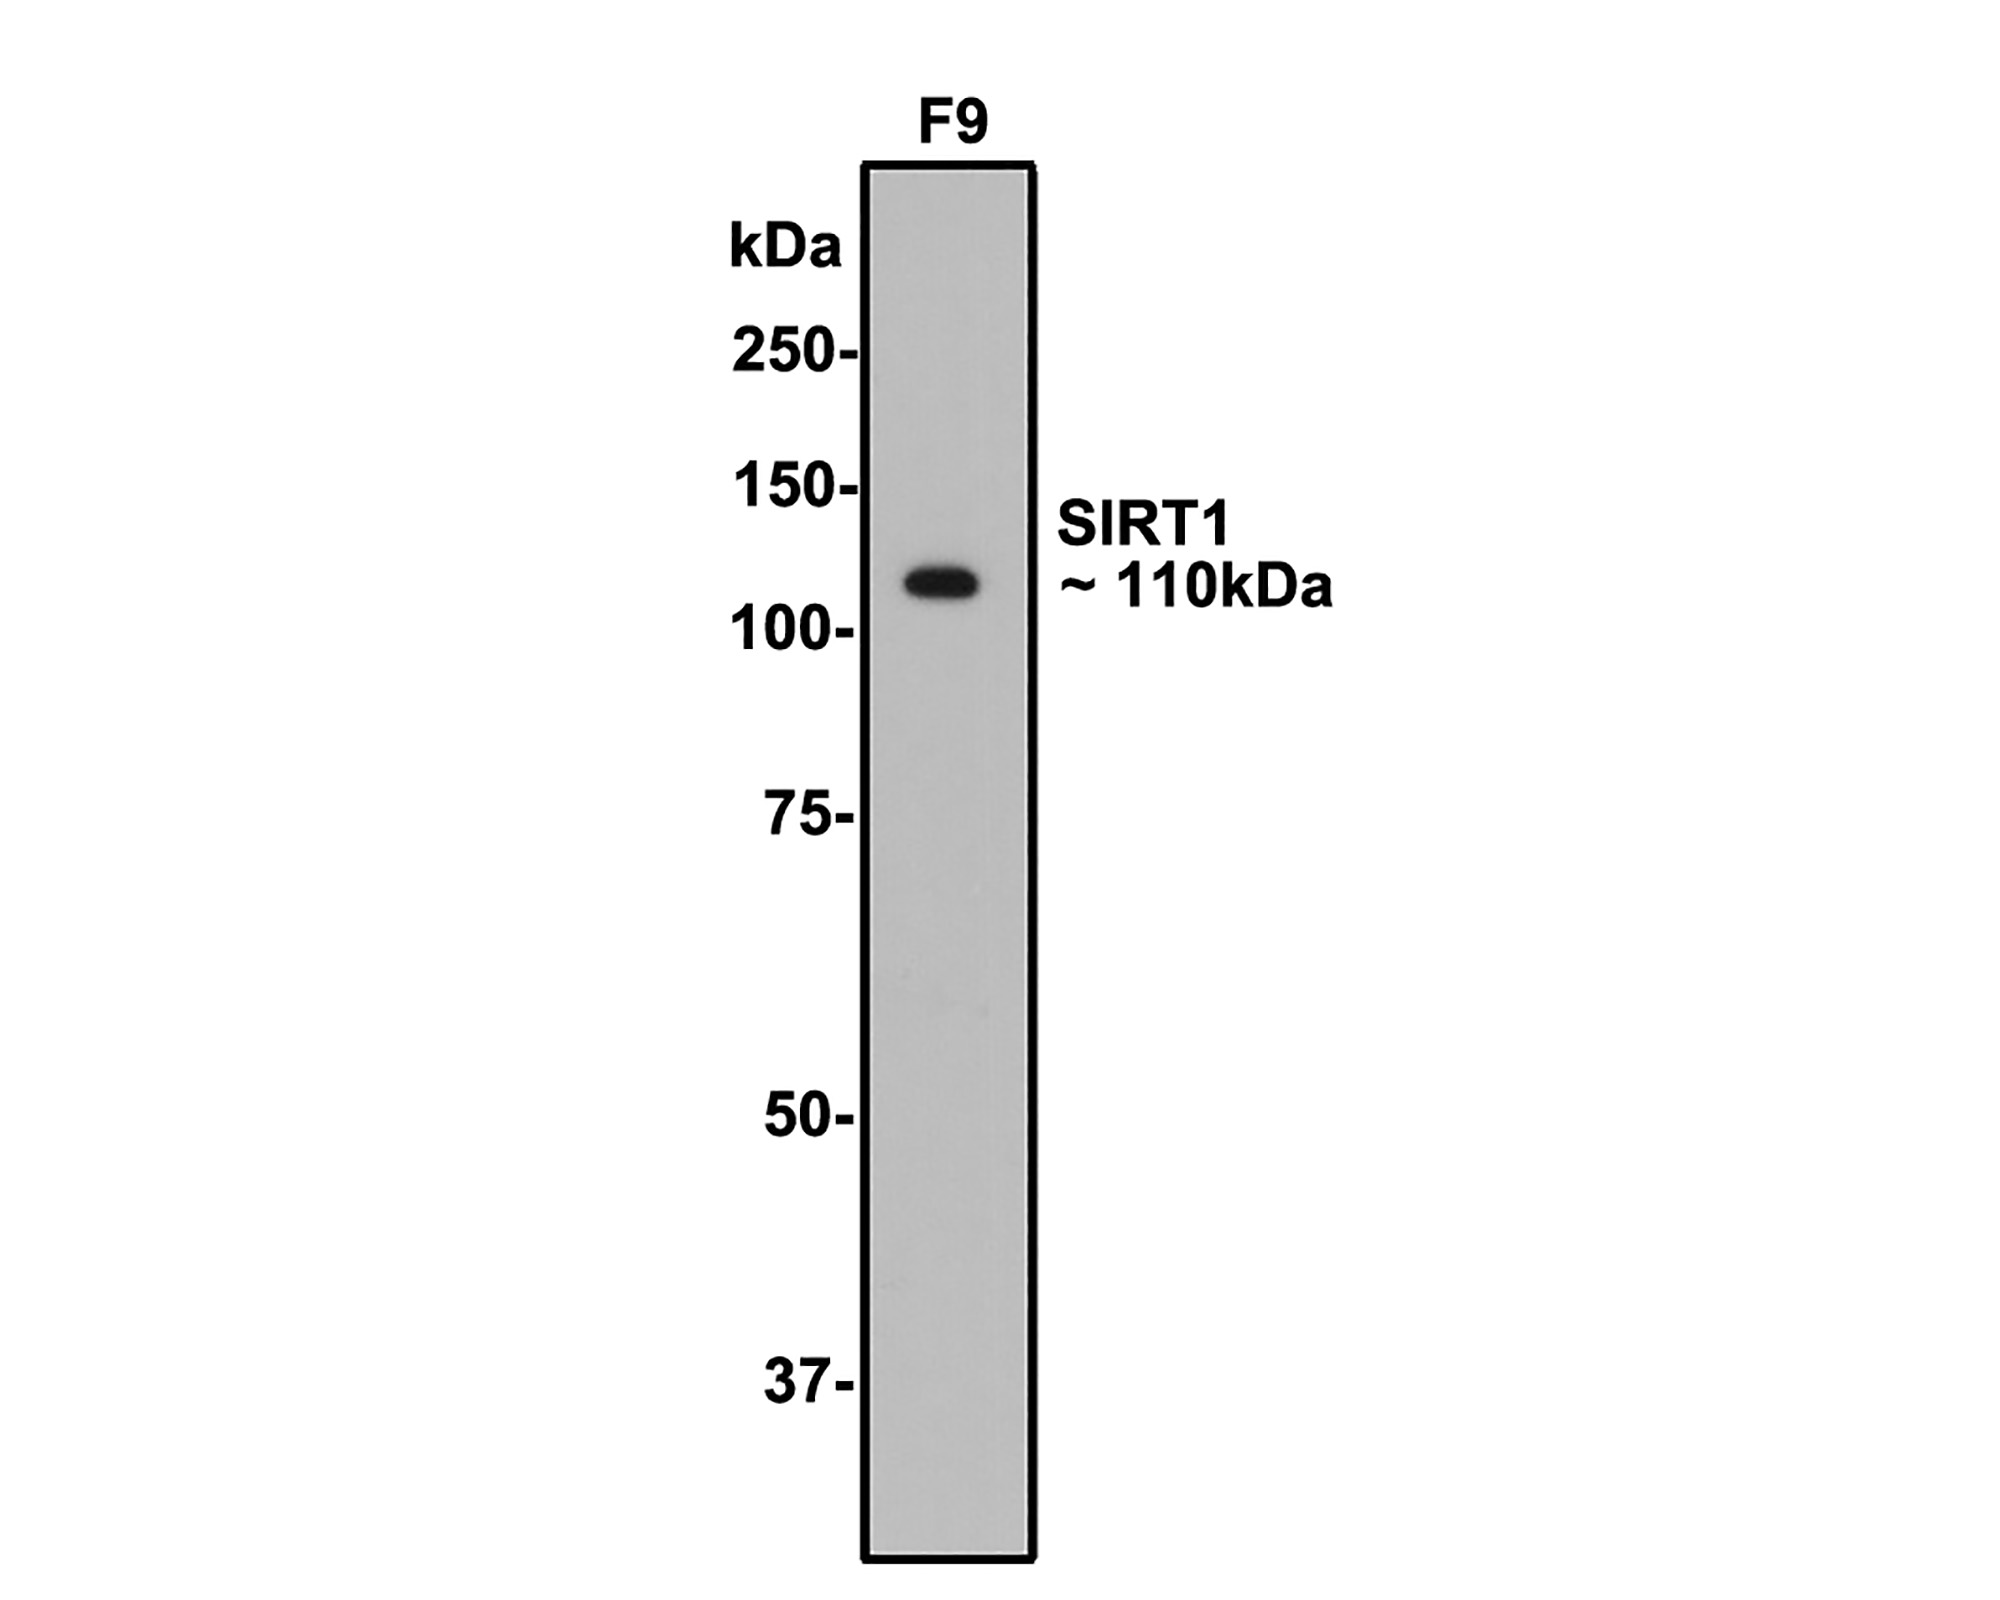 Western blot analysis of SIRT1 on F9 cell lysates with Rabbit anti-SIRT1 antibody (ER130811) at 1/2,000 dilution.<br />
<br />
Lysates/proteins at 10 µg/Lane.<br />
<br />
Predicted band size: 82 kDa<br />
Observed band size: 110 kDa<br />
<br />
Exposure time: 1 minute;<br />
<br />
8% SDS-PAGE gel.<br />
<br />
Proteins were transferred to a PVDF membrane and blocked with 5% NFDM/TBST for 1 hour at room temperature. The primary antibody (ER130811) at 1/2,000 dilution was used in 5% NFDM/TBST at room temperature for 2 hours. Goat Anti-Rabbit IgG - HRP Secondary Antibody (HA1001) at 1:300,000 dilution was used for 1 hour at room temperature.